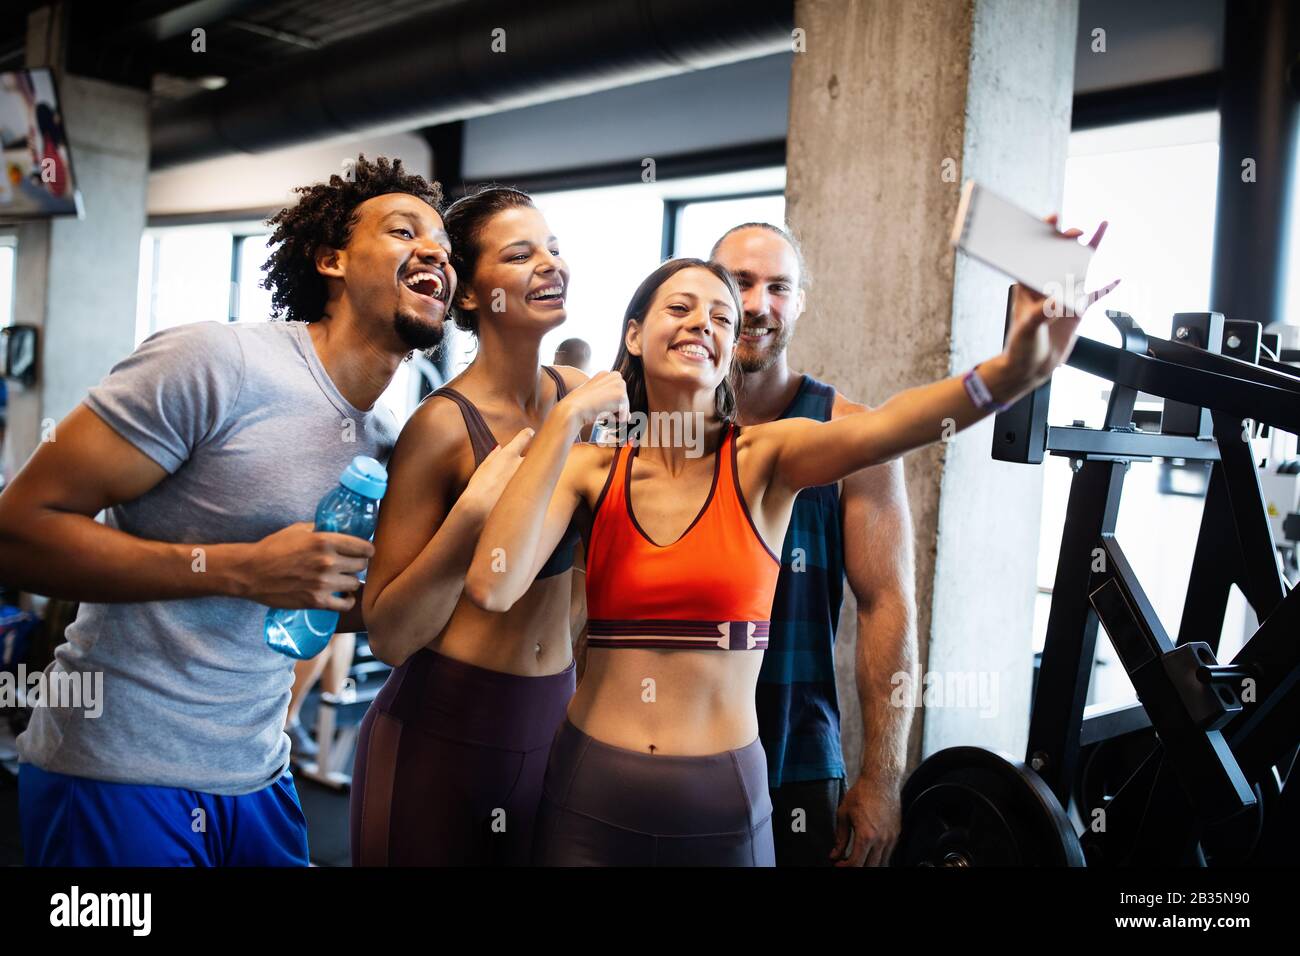 https://c8.alamy.com/comp/2B35N90/group-of-sportive-people-in-a-gym-taking-selfie-concepts-about-lifestyle-and-sport-in-fitness-club-2B35N90.jpg